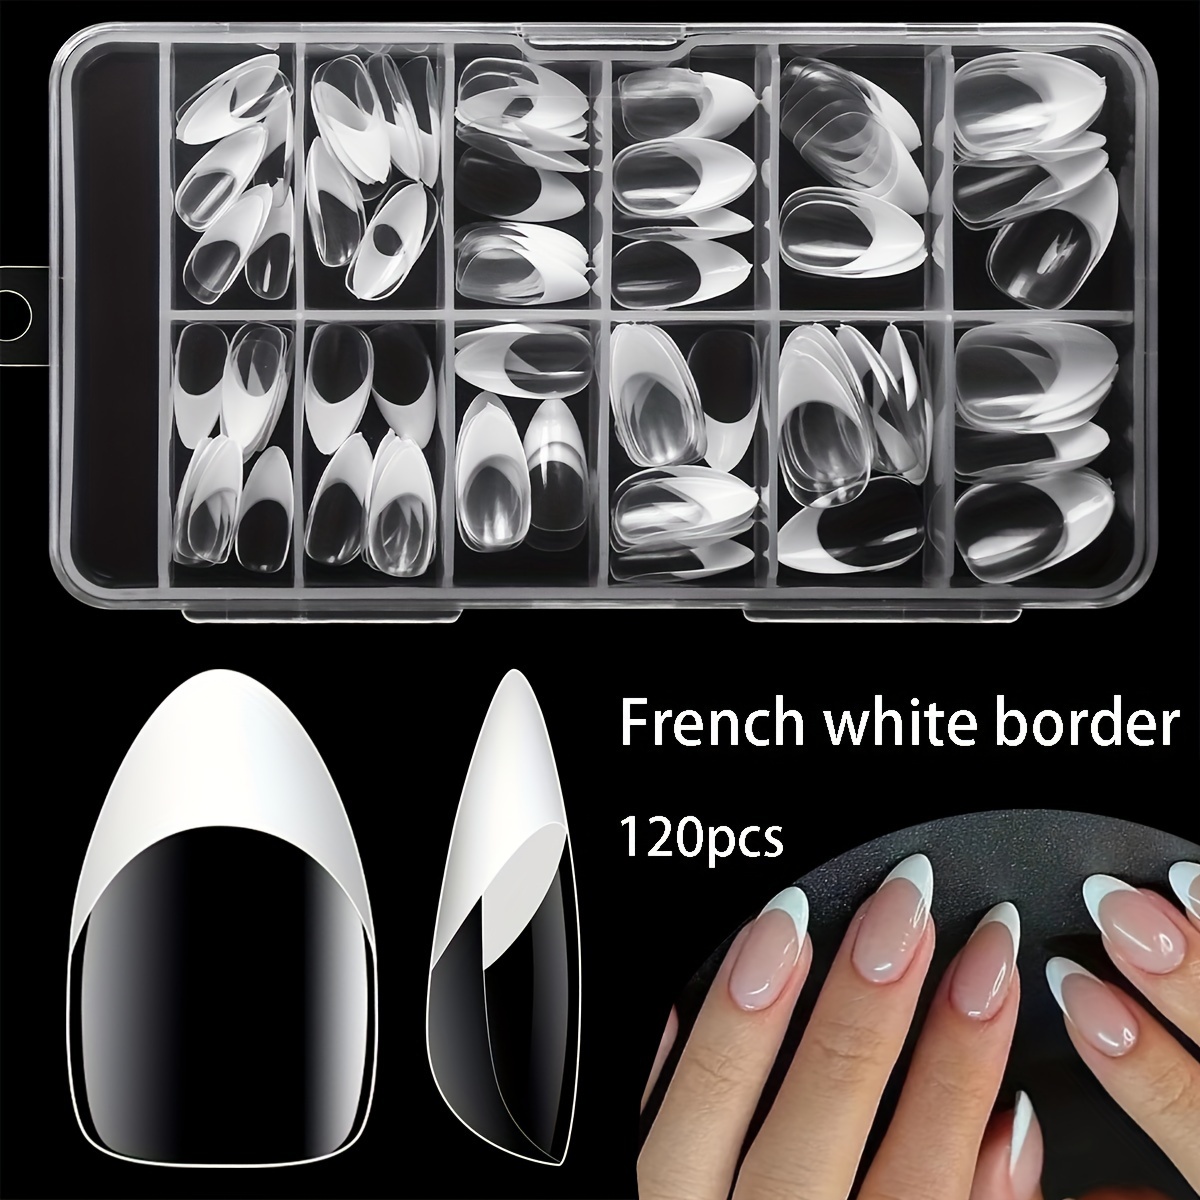 

120-piece French Manicure Nail Tips Set - Clear Acrylic Gel Half Cover Almond Shaped False Nails For Women & Girls, Medium Length, Glossy Finish, Diy Home Salon Nail Art Extensions Kit